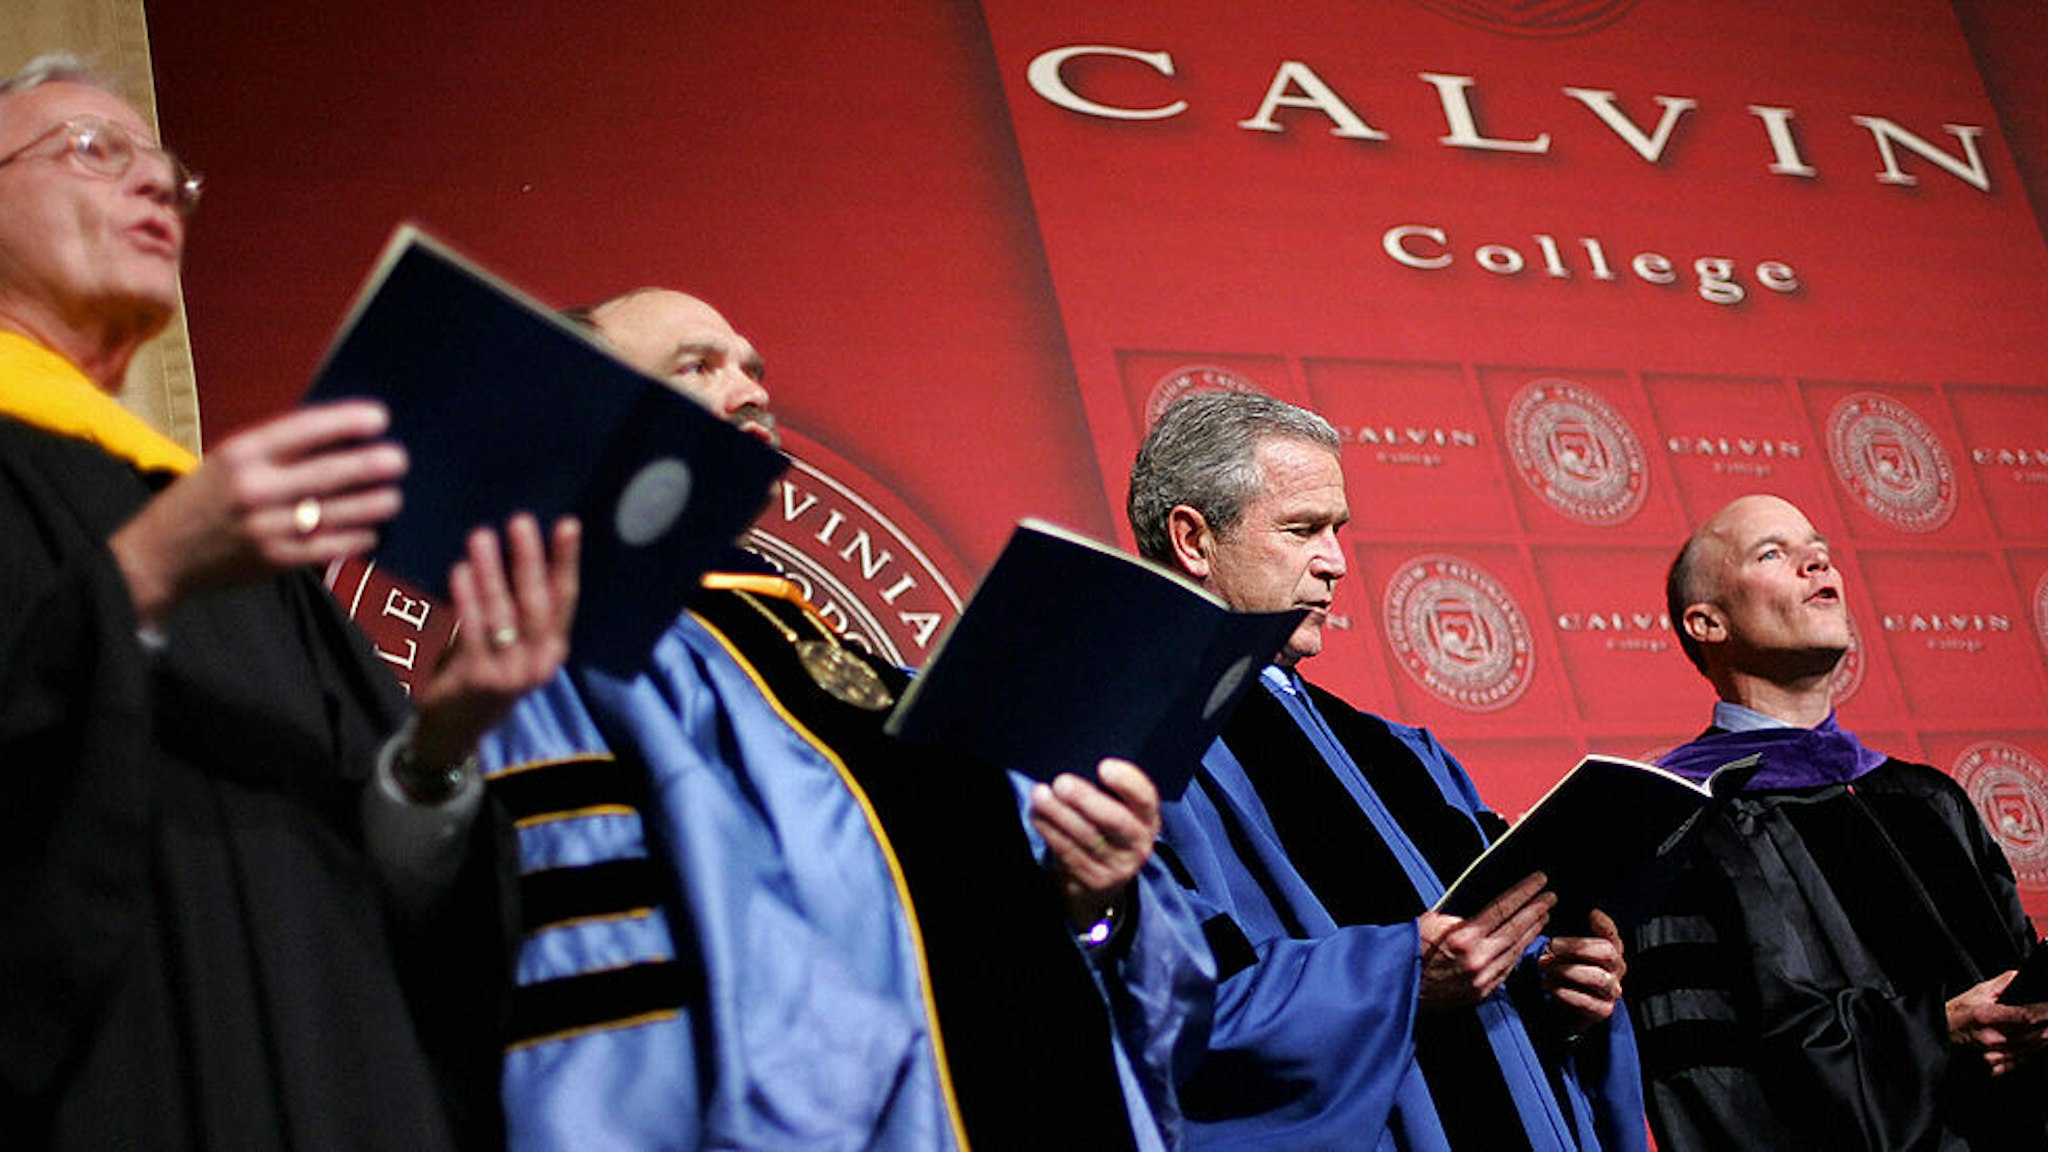 GRAND RAPIDS, UNITED STATES: US President George W. Bush looks at his hymnal while others sing before delivering the commencement address at Calvin College 21 May 2005 in the Calvin College Field House in Grand Rapids, Michigan